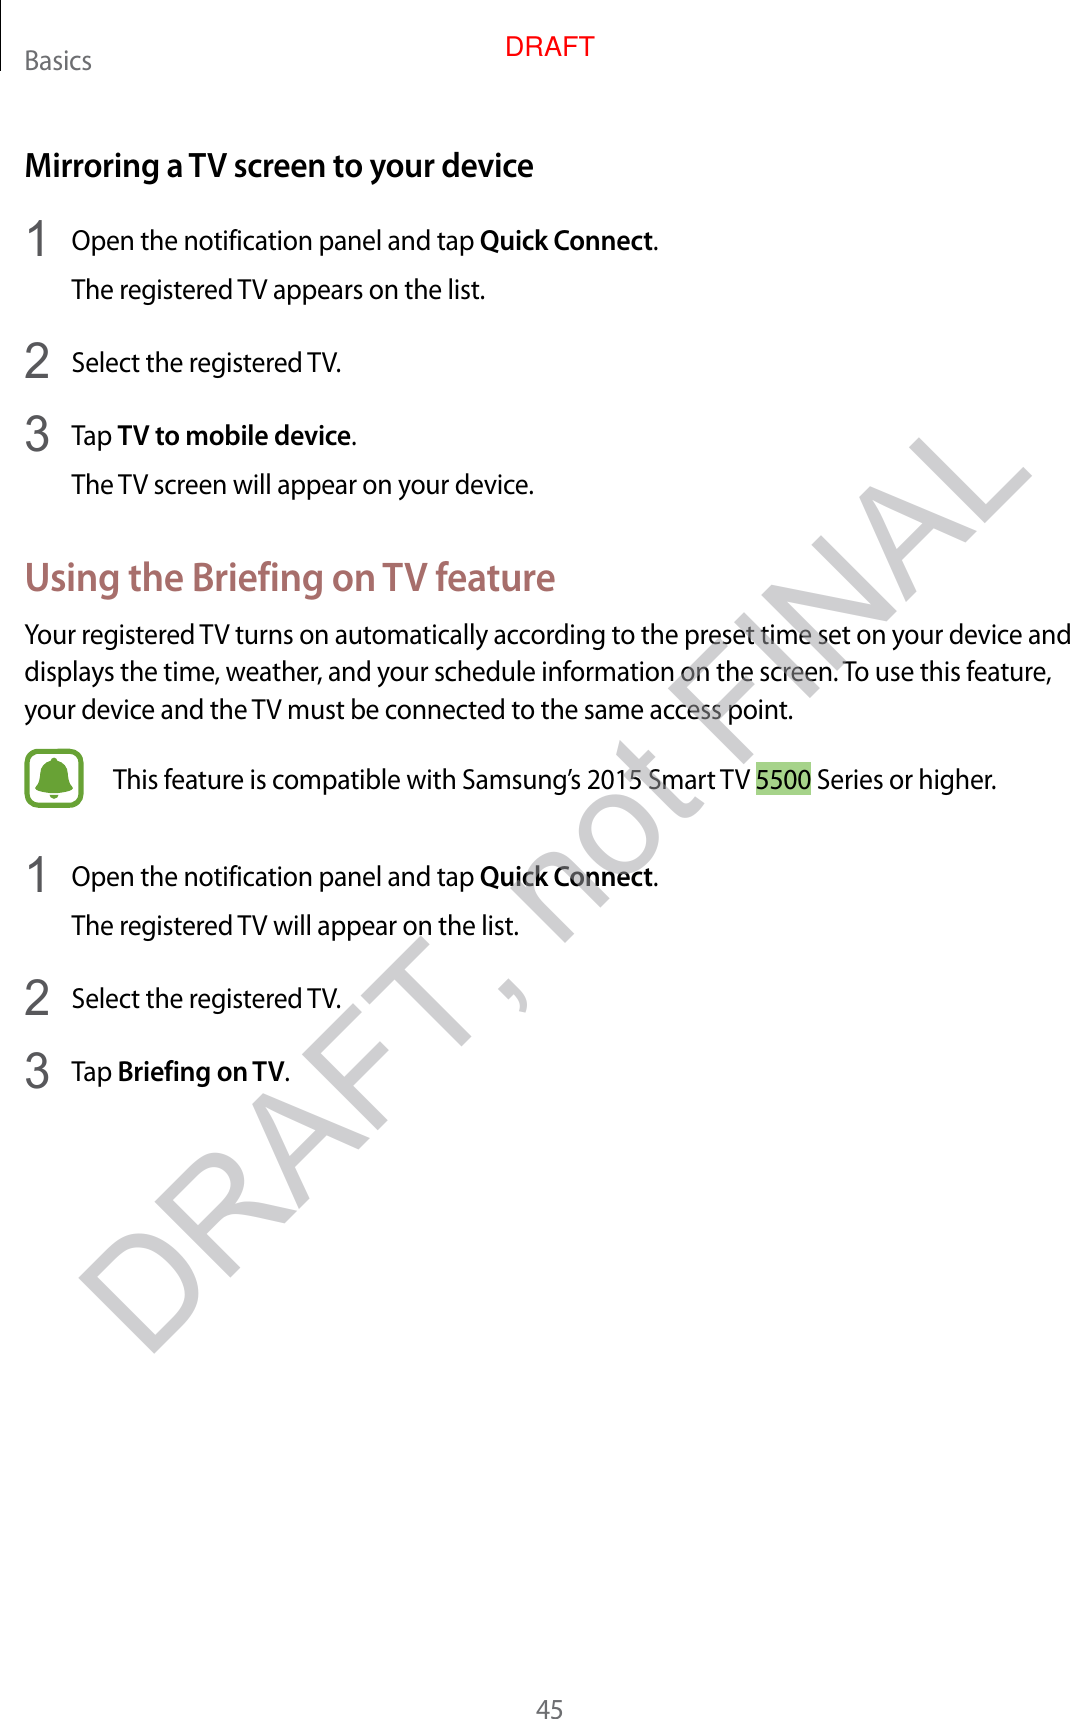 Basics45Mirroring a TV screen to y our devic e1  Open the notification panel and tap Quick Connect.The reg ist er ed TV appears on the list.2  Select the reg ister ed TV.3  Tap TV to mobile device.The TV screen will appear on your devic e .Using the Briefing on TV fea tur eYour register ed TV turns on automatically accor ding t o the pr eset time set on y our device and displays the time , w ea ther, and your schedule information on the scr een. To use this feature , your device and the TV must be connected to the same access point.This f eatur e is c ompatible with Samsung’s 2015 Smart TV 5500 Series or higher.1  Open the notification panel and tap Quick Connect.The reg ist er ed TV will appear on the list.2  Select the reg ister ed TV.3  Tap Briefing on TV.DRAFT, not FINALDRAFT